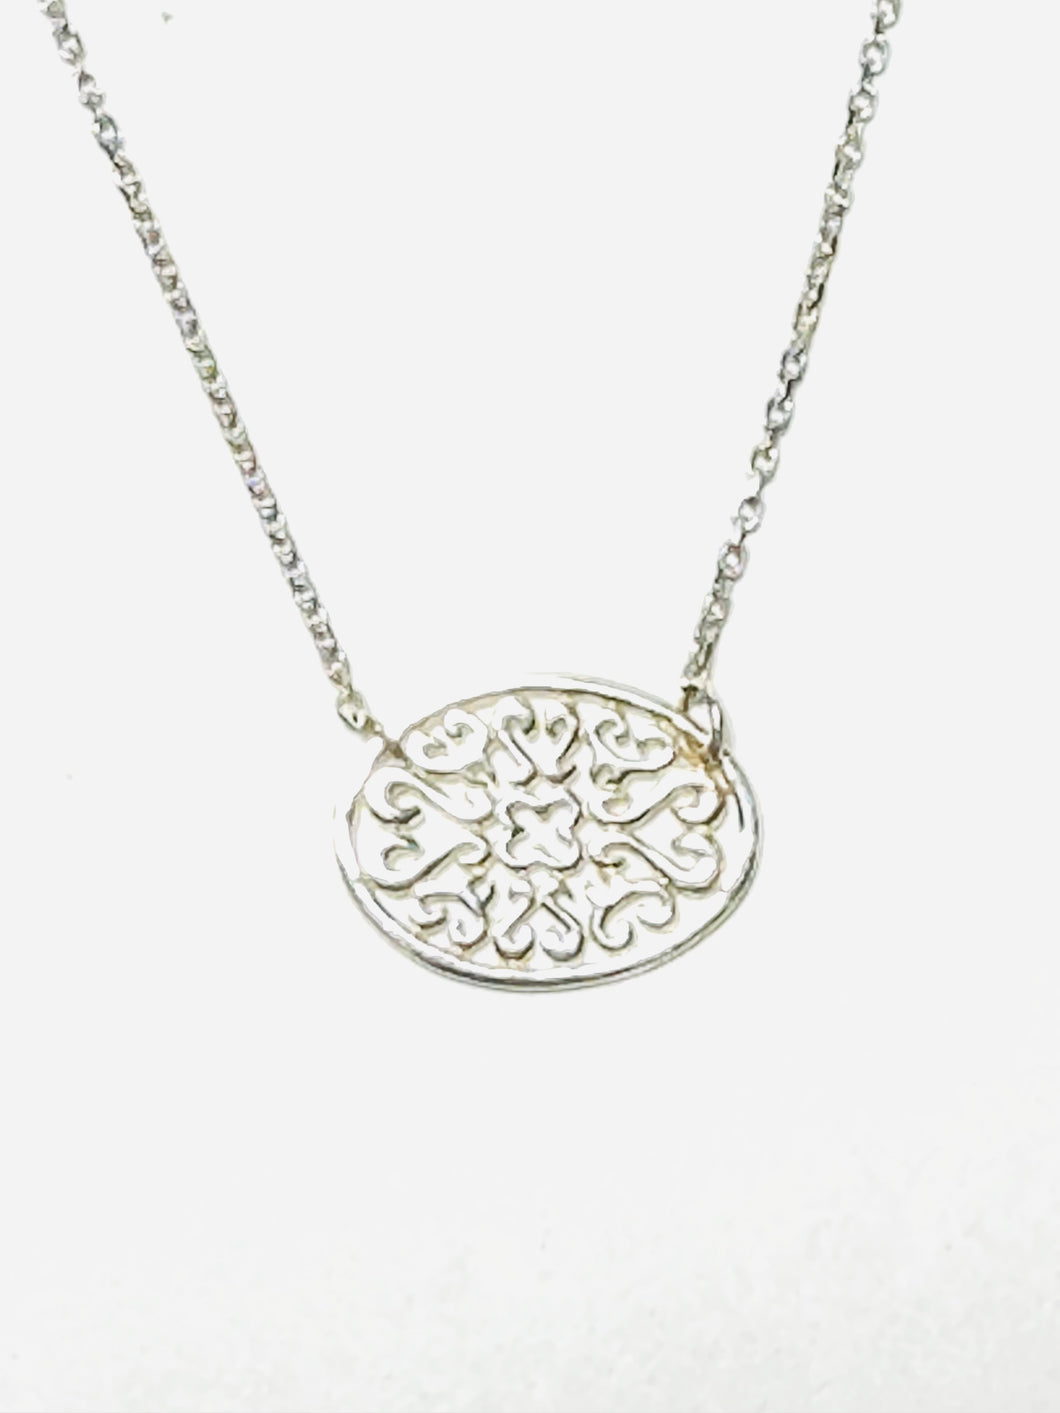 NEW-Sterling Artisan Gate Necklace